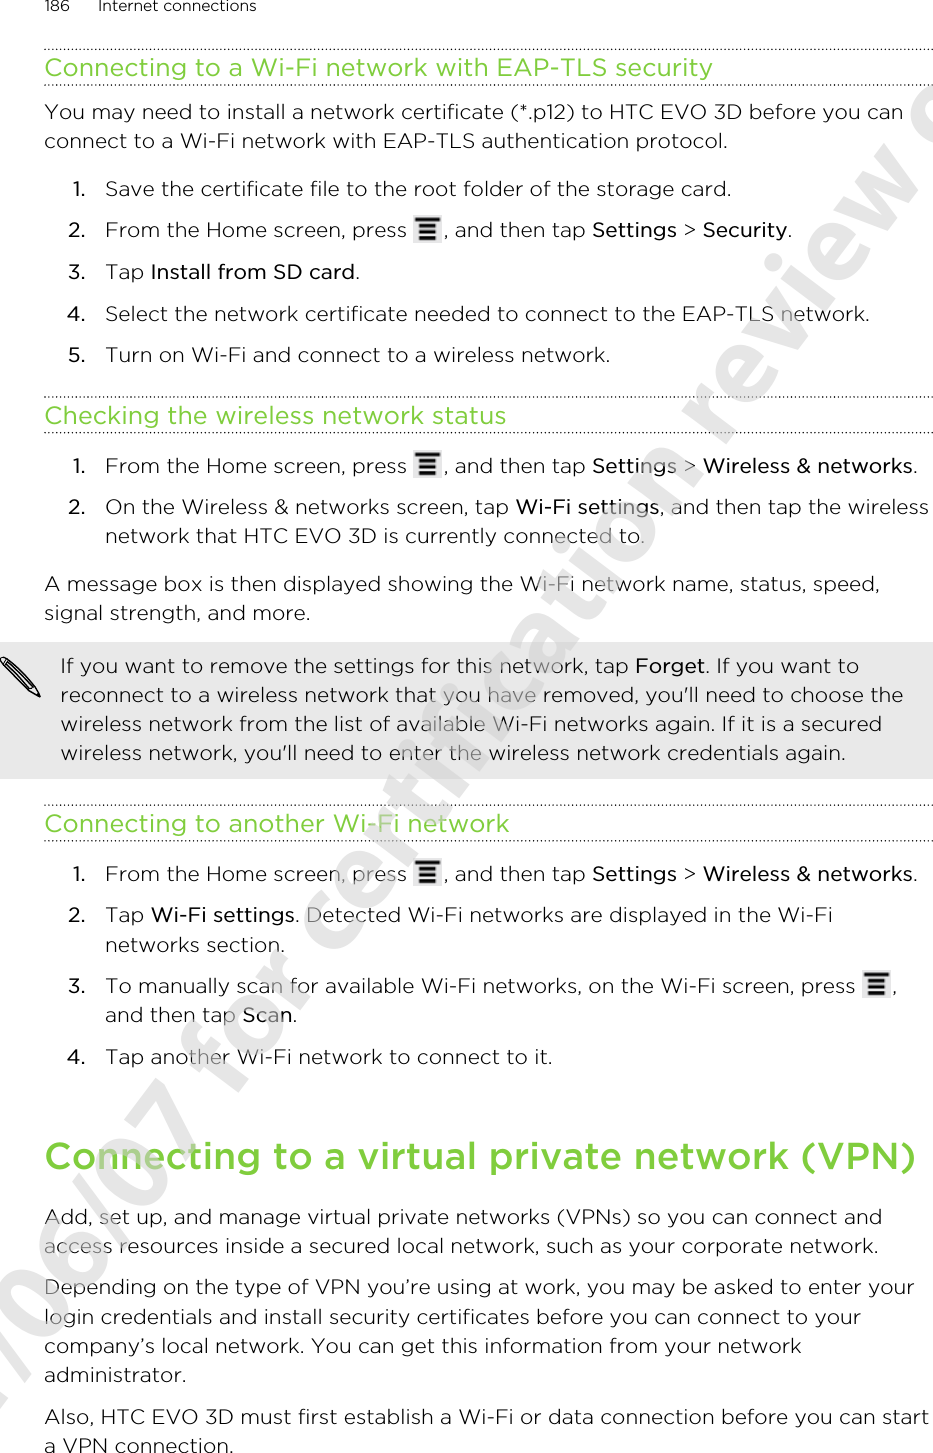 Connecting to a Wi-Fi network with EAP-TLS securityYou may need to install a network certificate (*.p12) to HTC EVO 3D before you canconnect to a Wi-Fi network with EAP-TLS authentication protocol.1. Save the certificate file to the root folder of the storage card.2. From the Home screen, press  , and then tap Settings &gt; Security.3. Tap Install from SD card.4. Select the network certificate needed to connect to the EAP-TLS network.5. Turn on Wi-Fi and connect to a wireless network.Checking the wireless network status1. From the Home screen, press  , and then tap Settings &gt; Wireless &amp; networks.2. On the Wireless &amp; networks screen, tap Wi-Fi settings, and then tap the wirelessnetwork that HTC EVO 3D is currently connected to.A message box is then displayed showing the Wi-Fi network name, status, speed,signal strength, and more.If you want to remove the settings for this network, tap Forget. If you want toreconnect to a wireless network that you have removed, you&apos;ll need to choose thewireless network from the list of available Wi-Fi networks again. If it is a securedwireless network, you&apos;ll need to enter the wireless network credentials again.Connecting to another Wi-Fi network1. From the Home screen, press  , and then tap Settings &gt; Wireless &amp; networks.2. Tap Wi-Fi settings. Detected Wi-Fi networks are displayed in the Wi-Finetworks section.3. To manually scan for available Wi-Fi networks, on the Wi-Fi screen, press  ,and then tap Scan.4. Tap another Wi-Fi network to connect to it.Connecting to a virtual private network (VPN)Add, set up, and manage virtual private networks (VPNs) so you can connect andaccess resources inside a secured local network, such as your corporate network.Depending on the type of VPN you’re using at work, you may be asked to enter yourlogin credentials and install security certificates before you can connect to yourcompany’s local network. You can get this information from your networkadministrator.Also, HTC EVO 3D must first establish a Wi-Fi or data connection before you can starta VPN connection.186 Internet connections2011/06/07 for certification review only